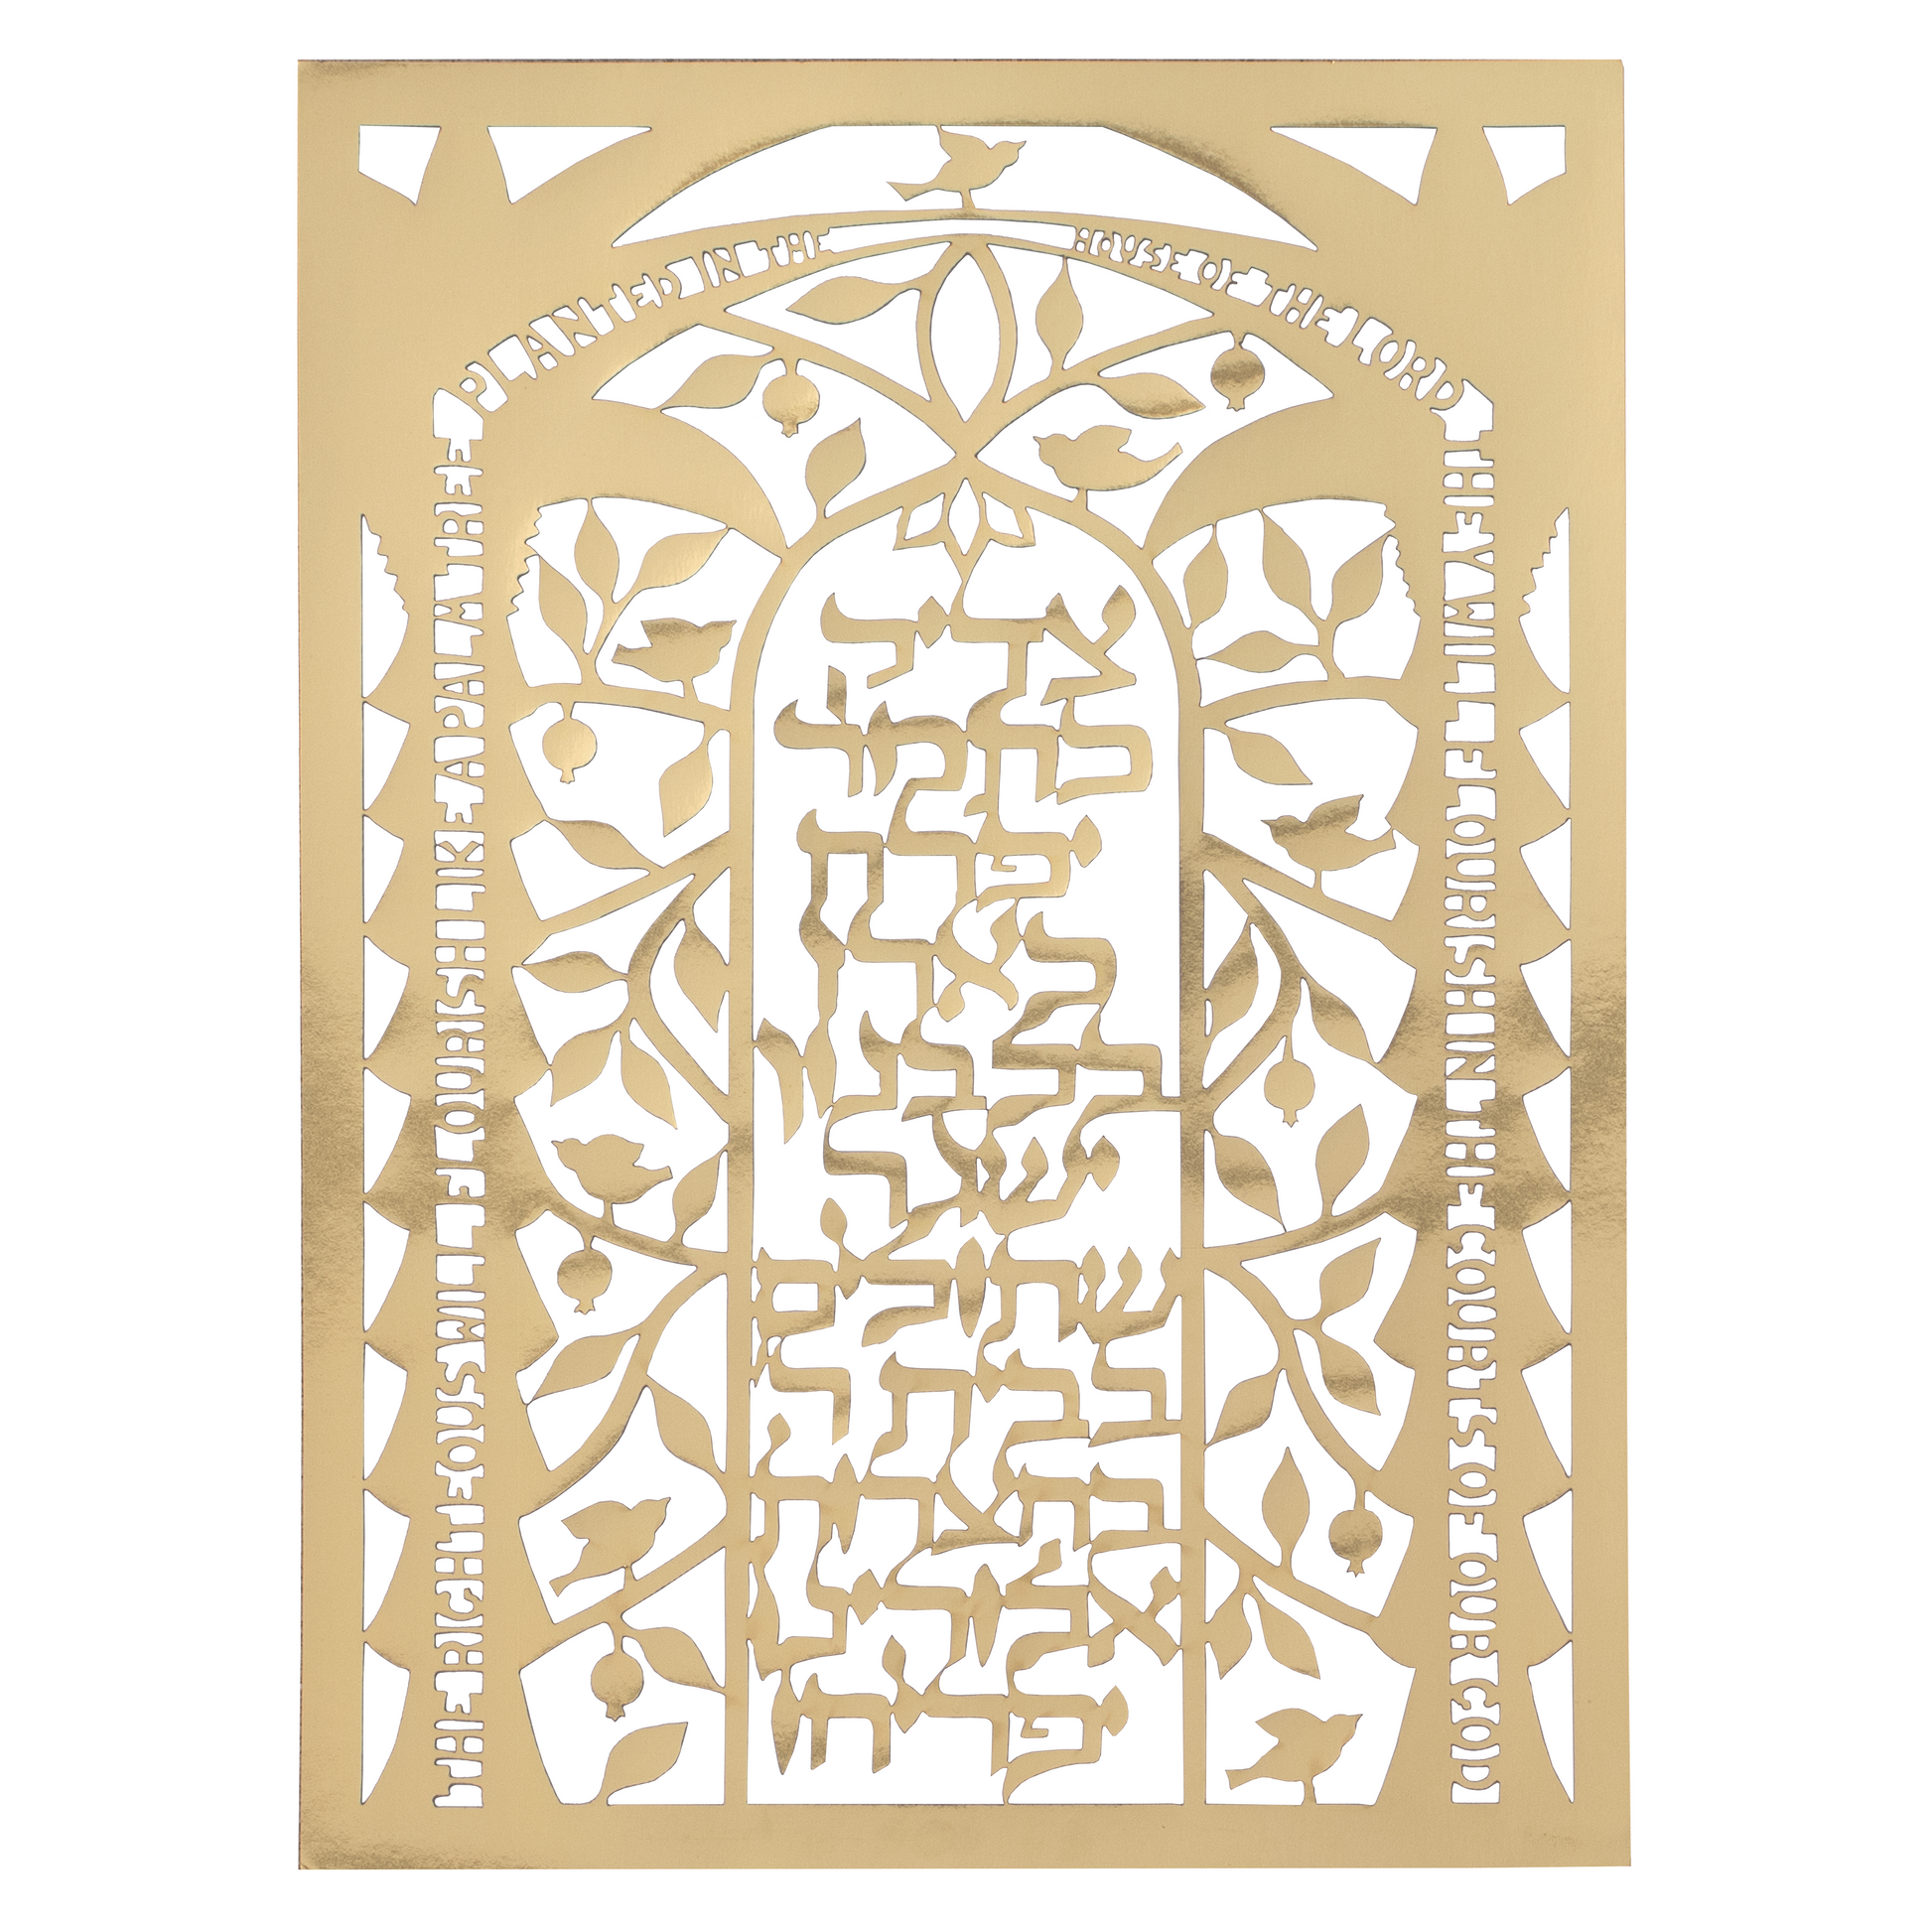 hardcarfter papercut artwork of psalms 92 with white background and gold detailing 